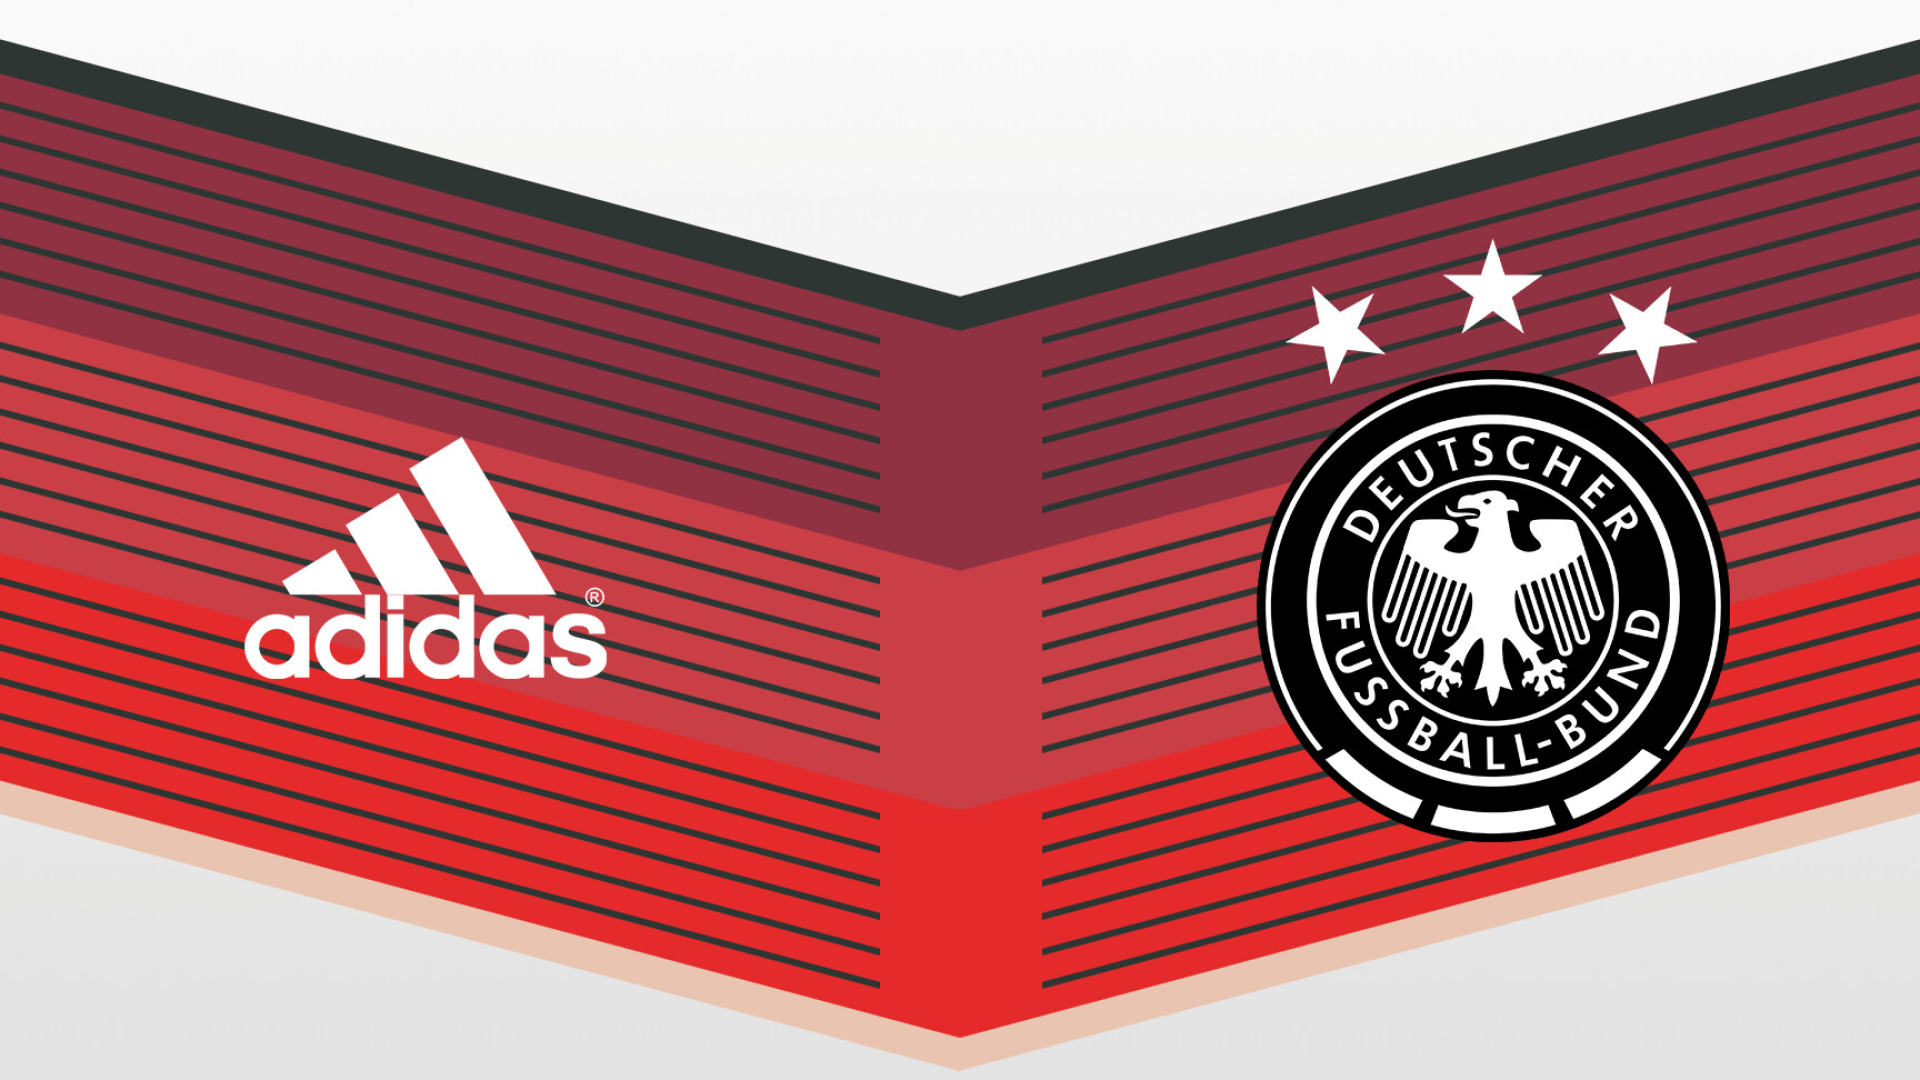 Germany Soccer Team: Adidas - the longstanding kit provider, The front view of the players' sports uniform. 1920x1080 Full HD Wallpaper.